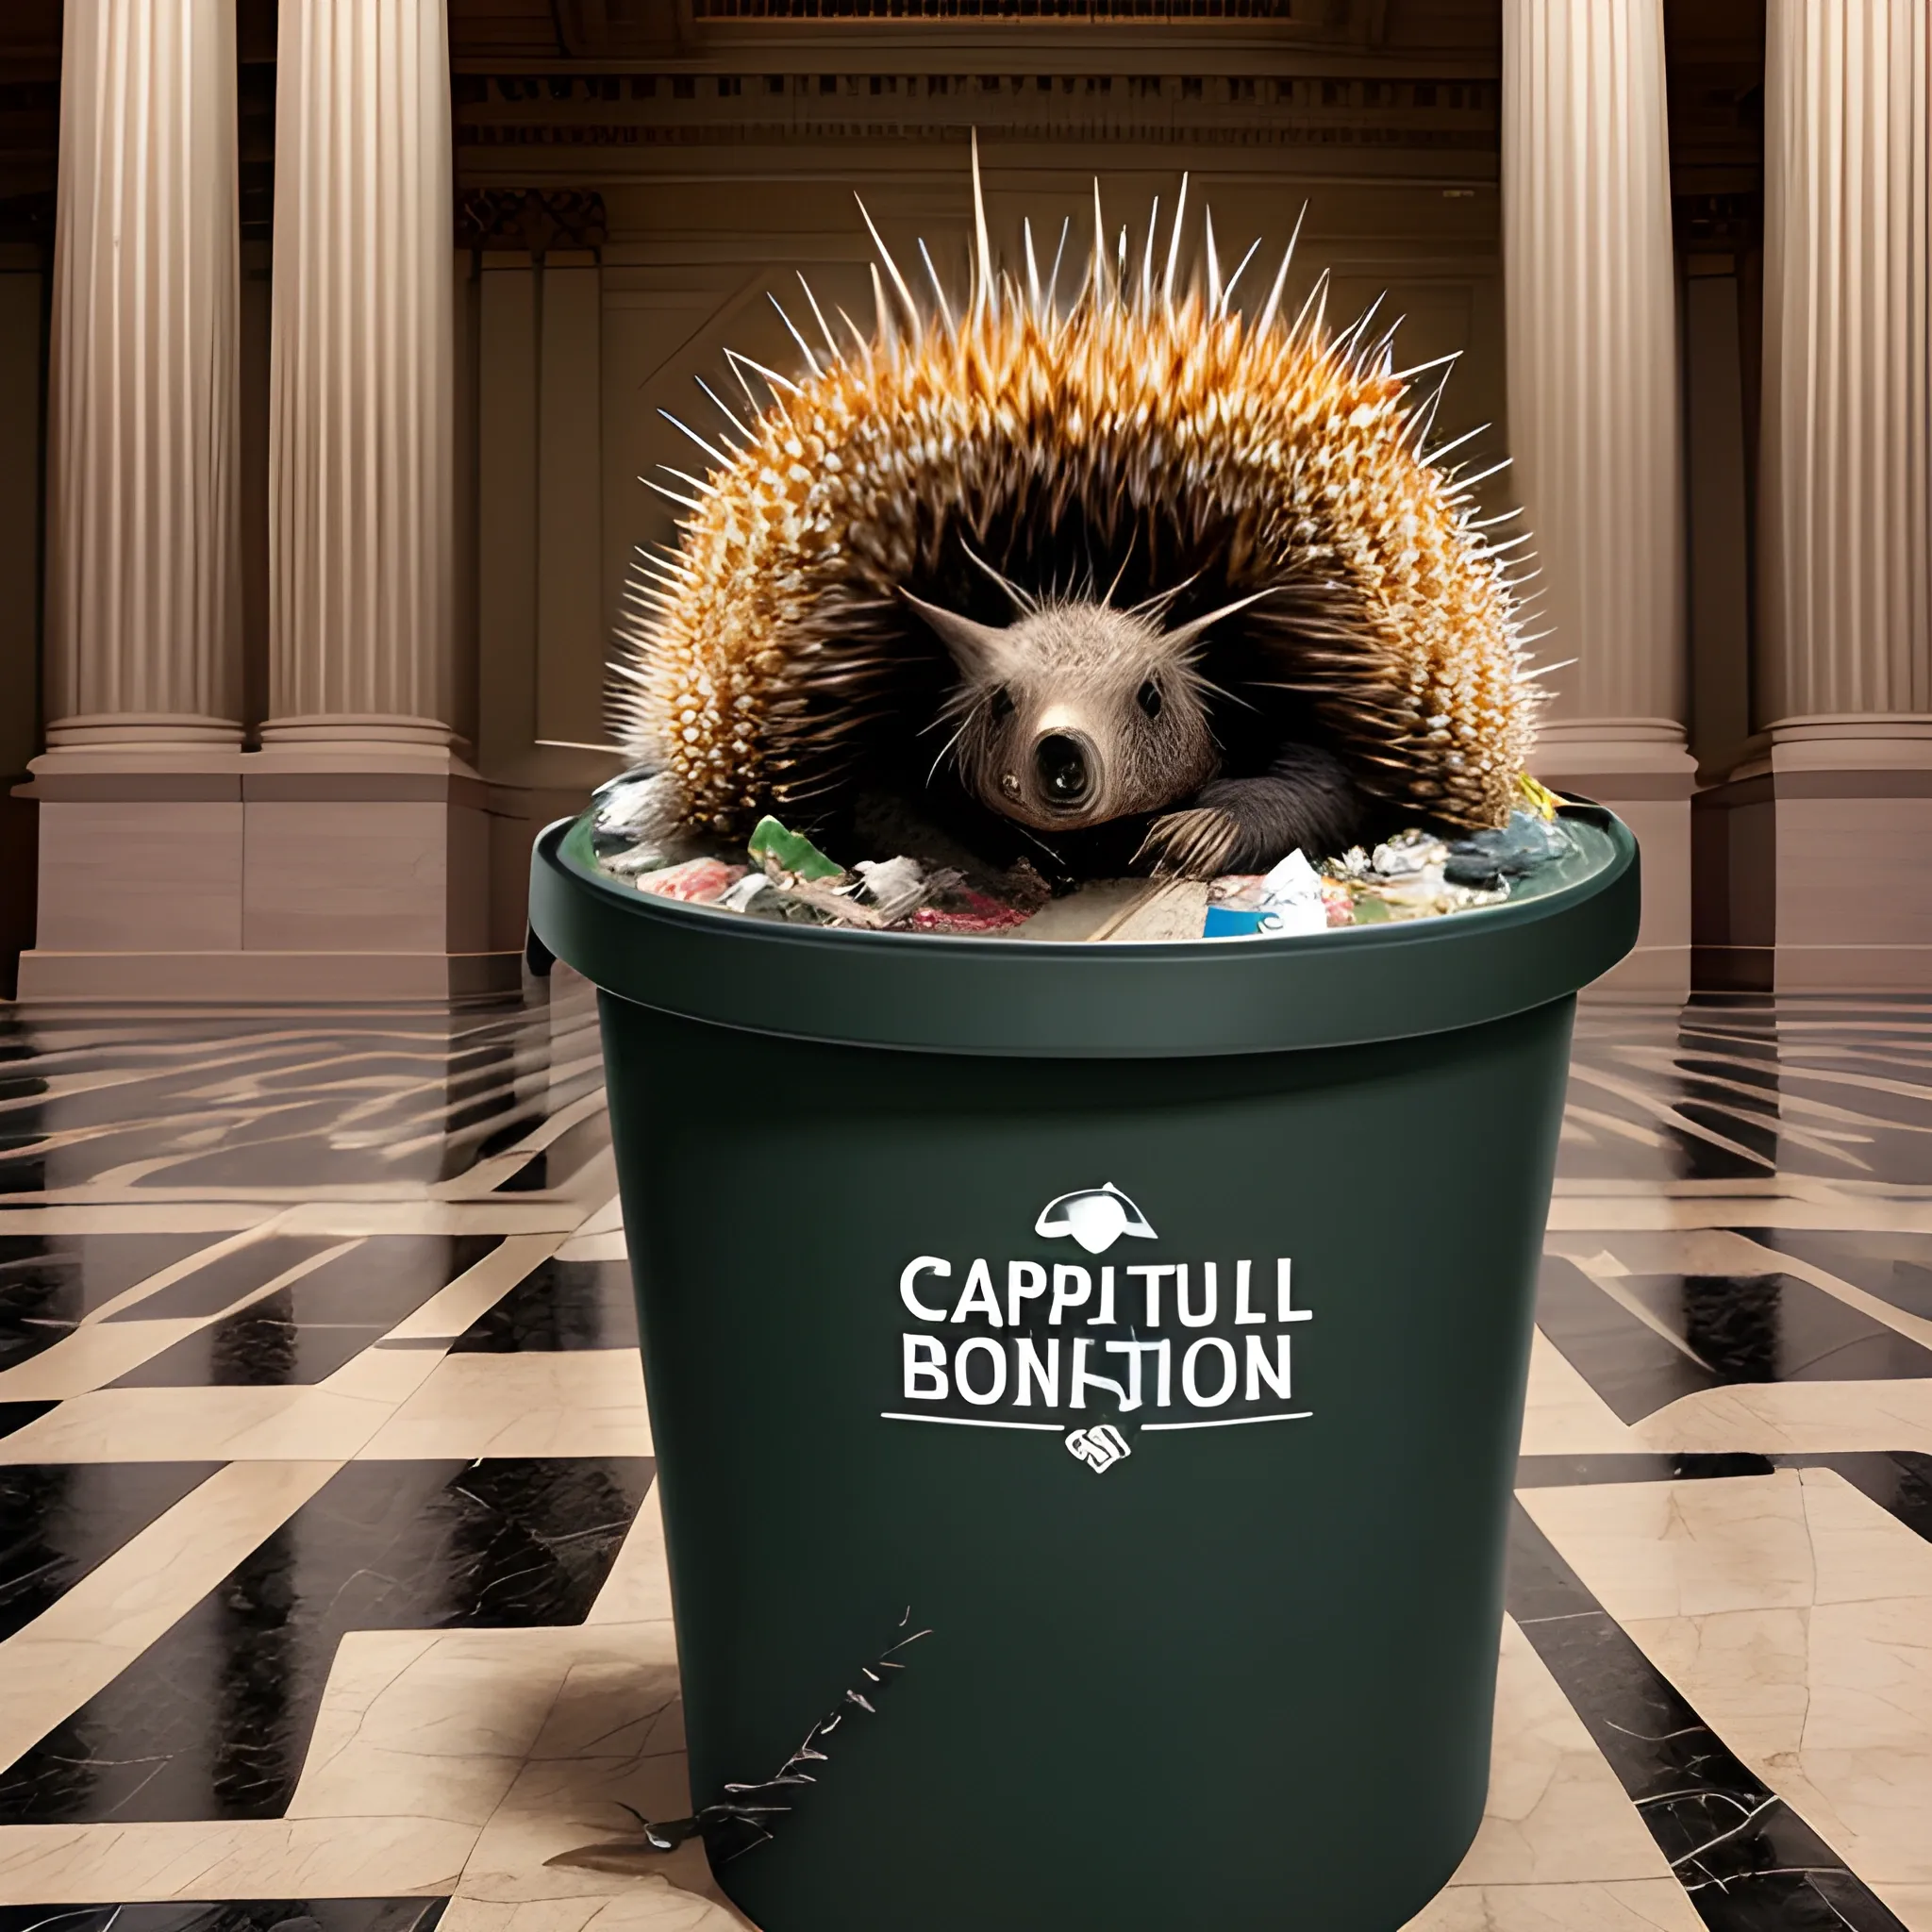 A trash can with a Capitol building rotunda sticking out of the trash, being emptied by a porcupine, Cartoon